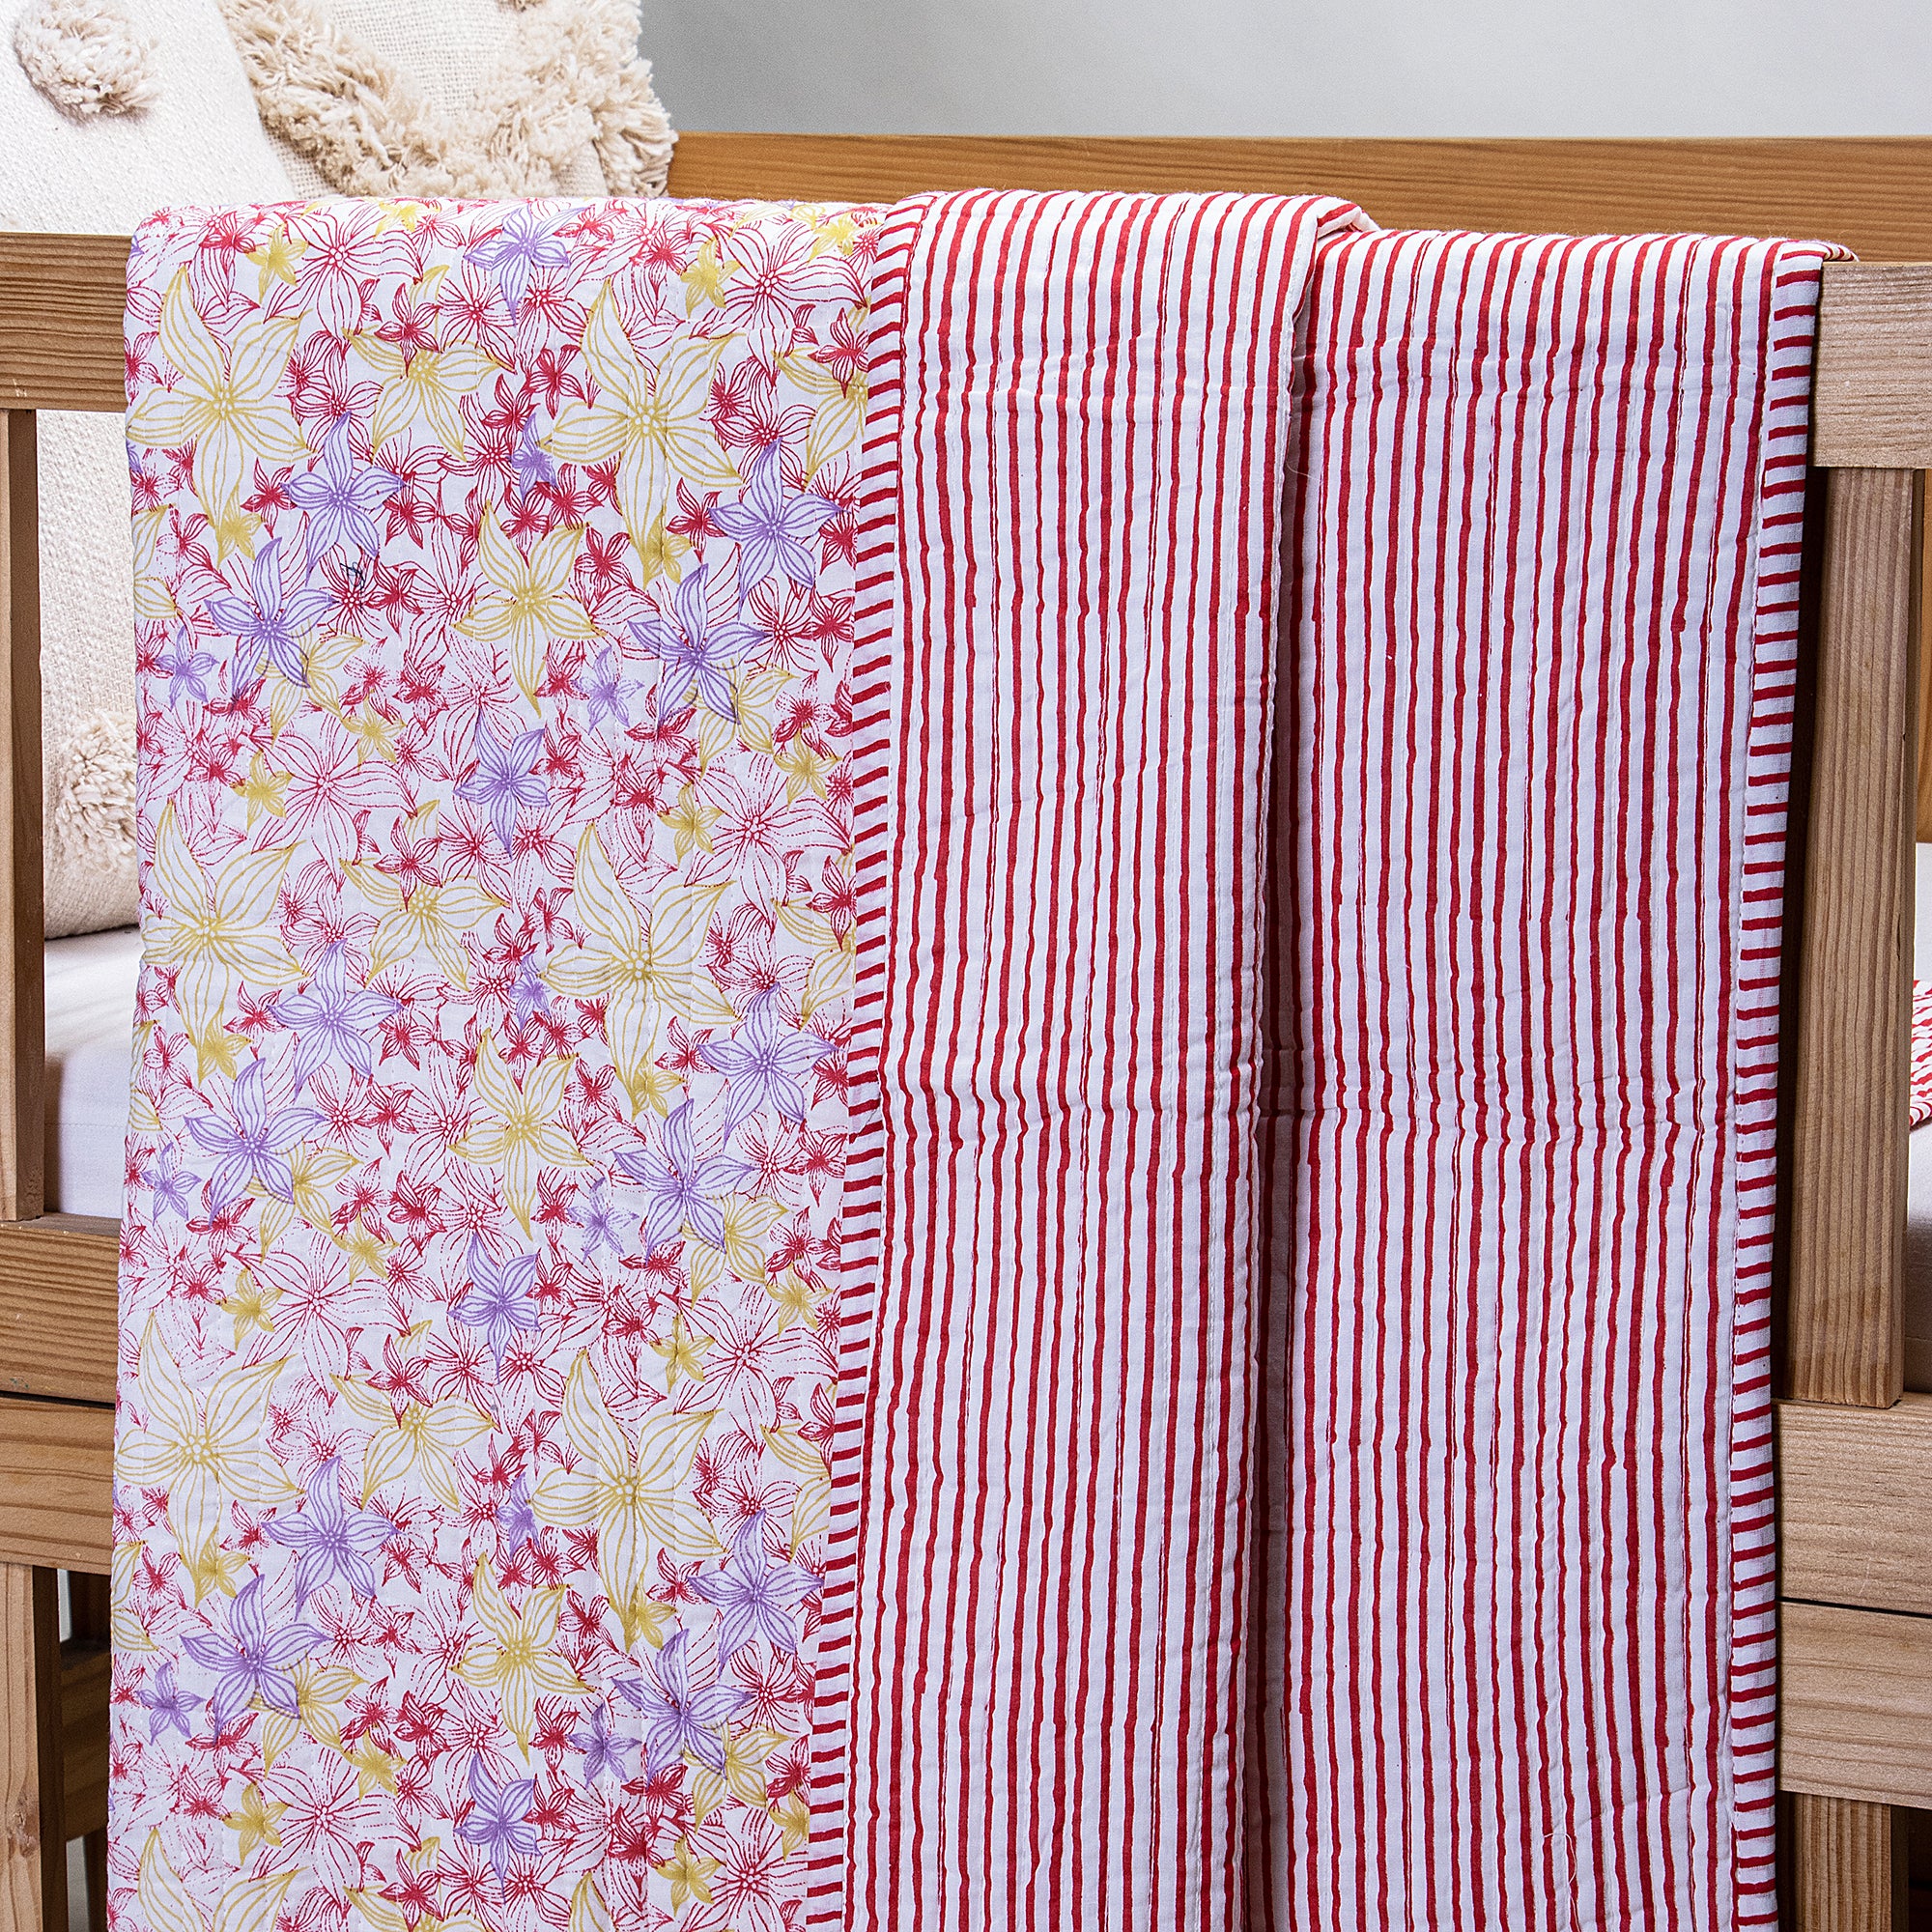 Multicolor Floral Print Soft Modern Baby Blankets